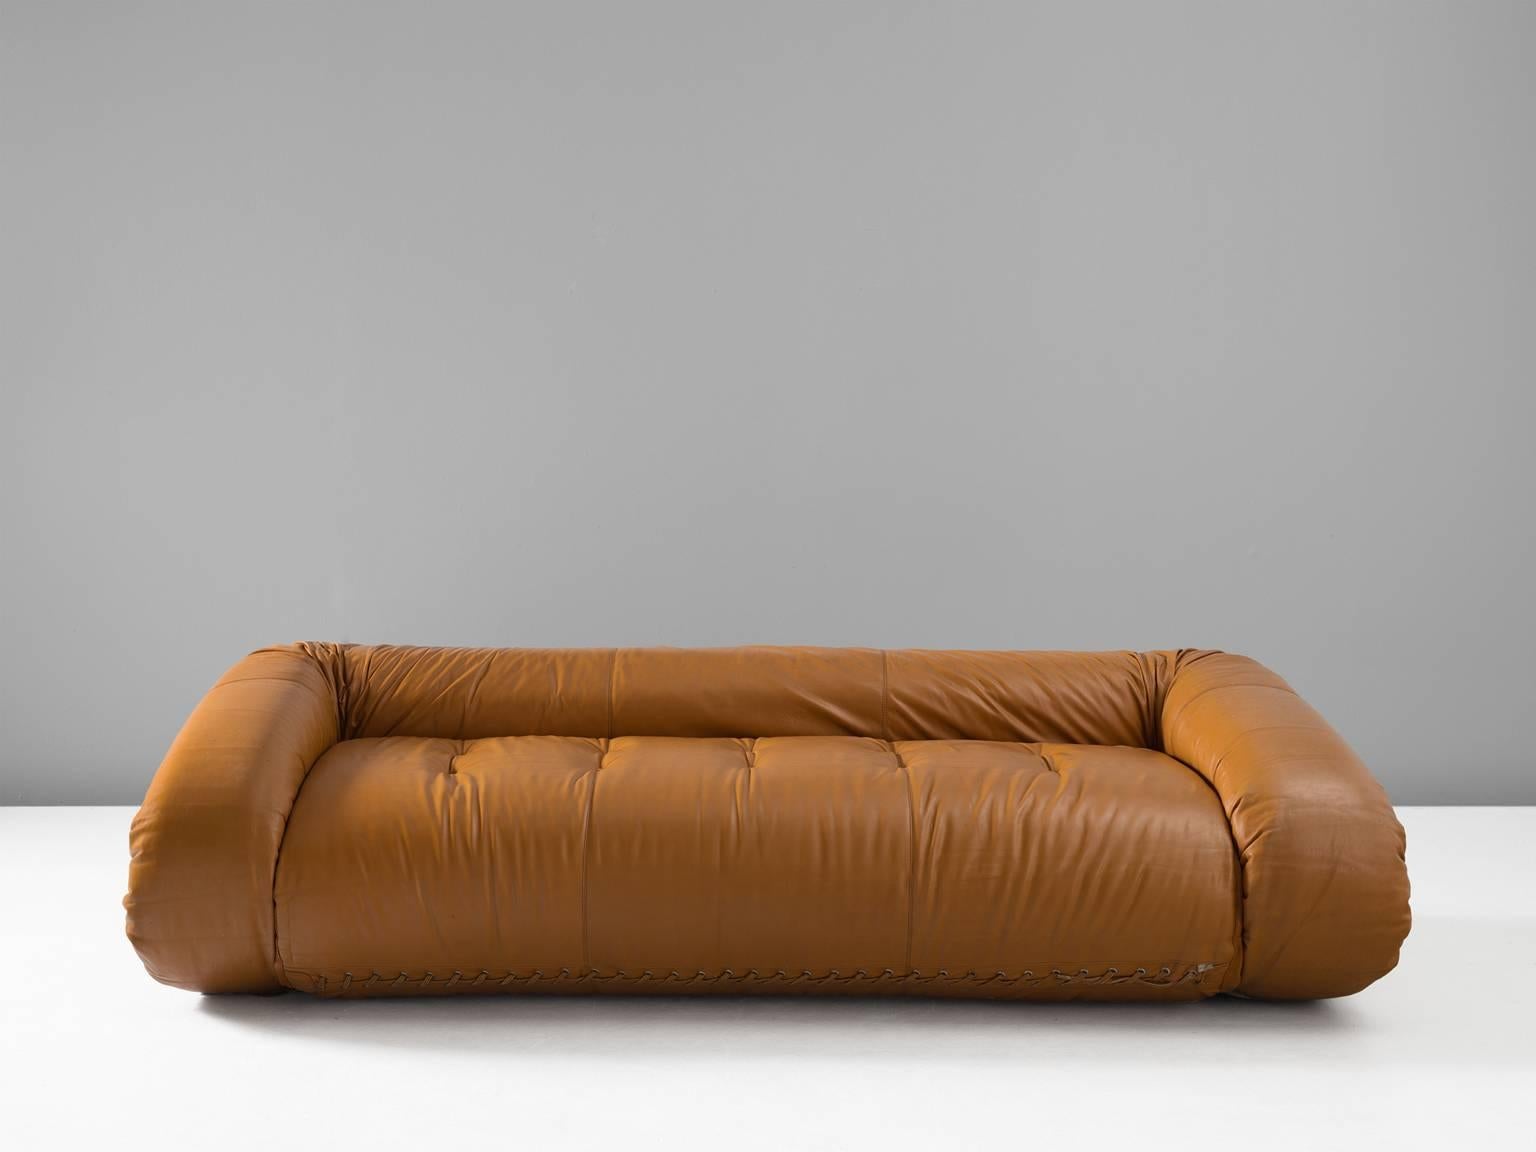 Alessandro Becchi for Giovannetti, Anfibio leather sofa bed, Italy, 1970s.

This rare Anfibio (translation: amphibian) sofa was designed by Alessandro Becchi (1946-) for Giovannetti in the 1970s. This convertible Italian sofa is upholstered with